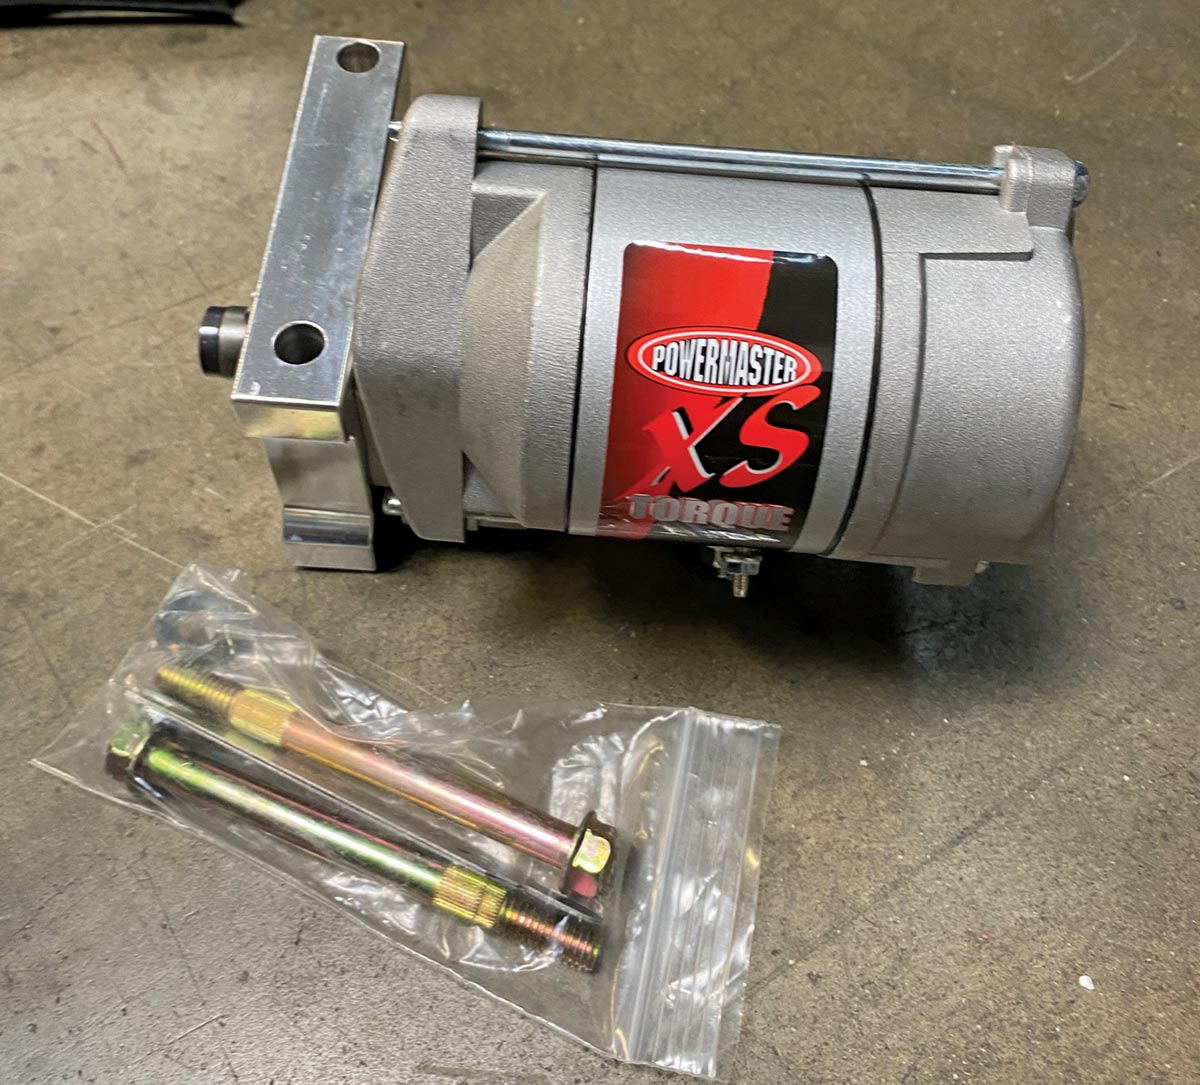 a fresh Powermaster XS Torque gear reduction starter waits to be installed